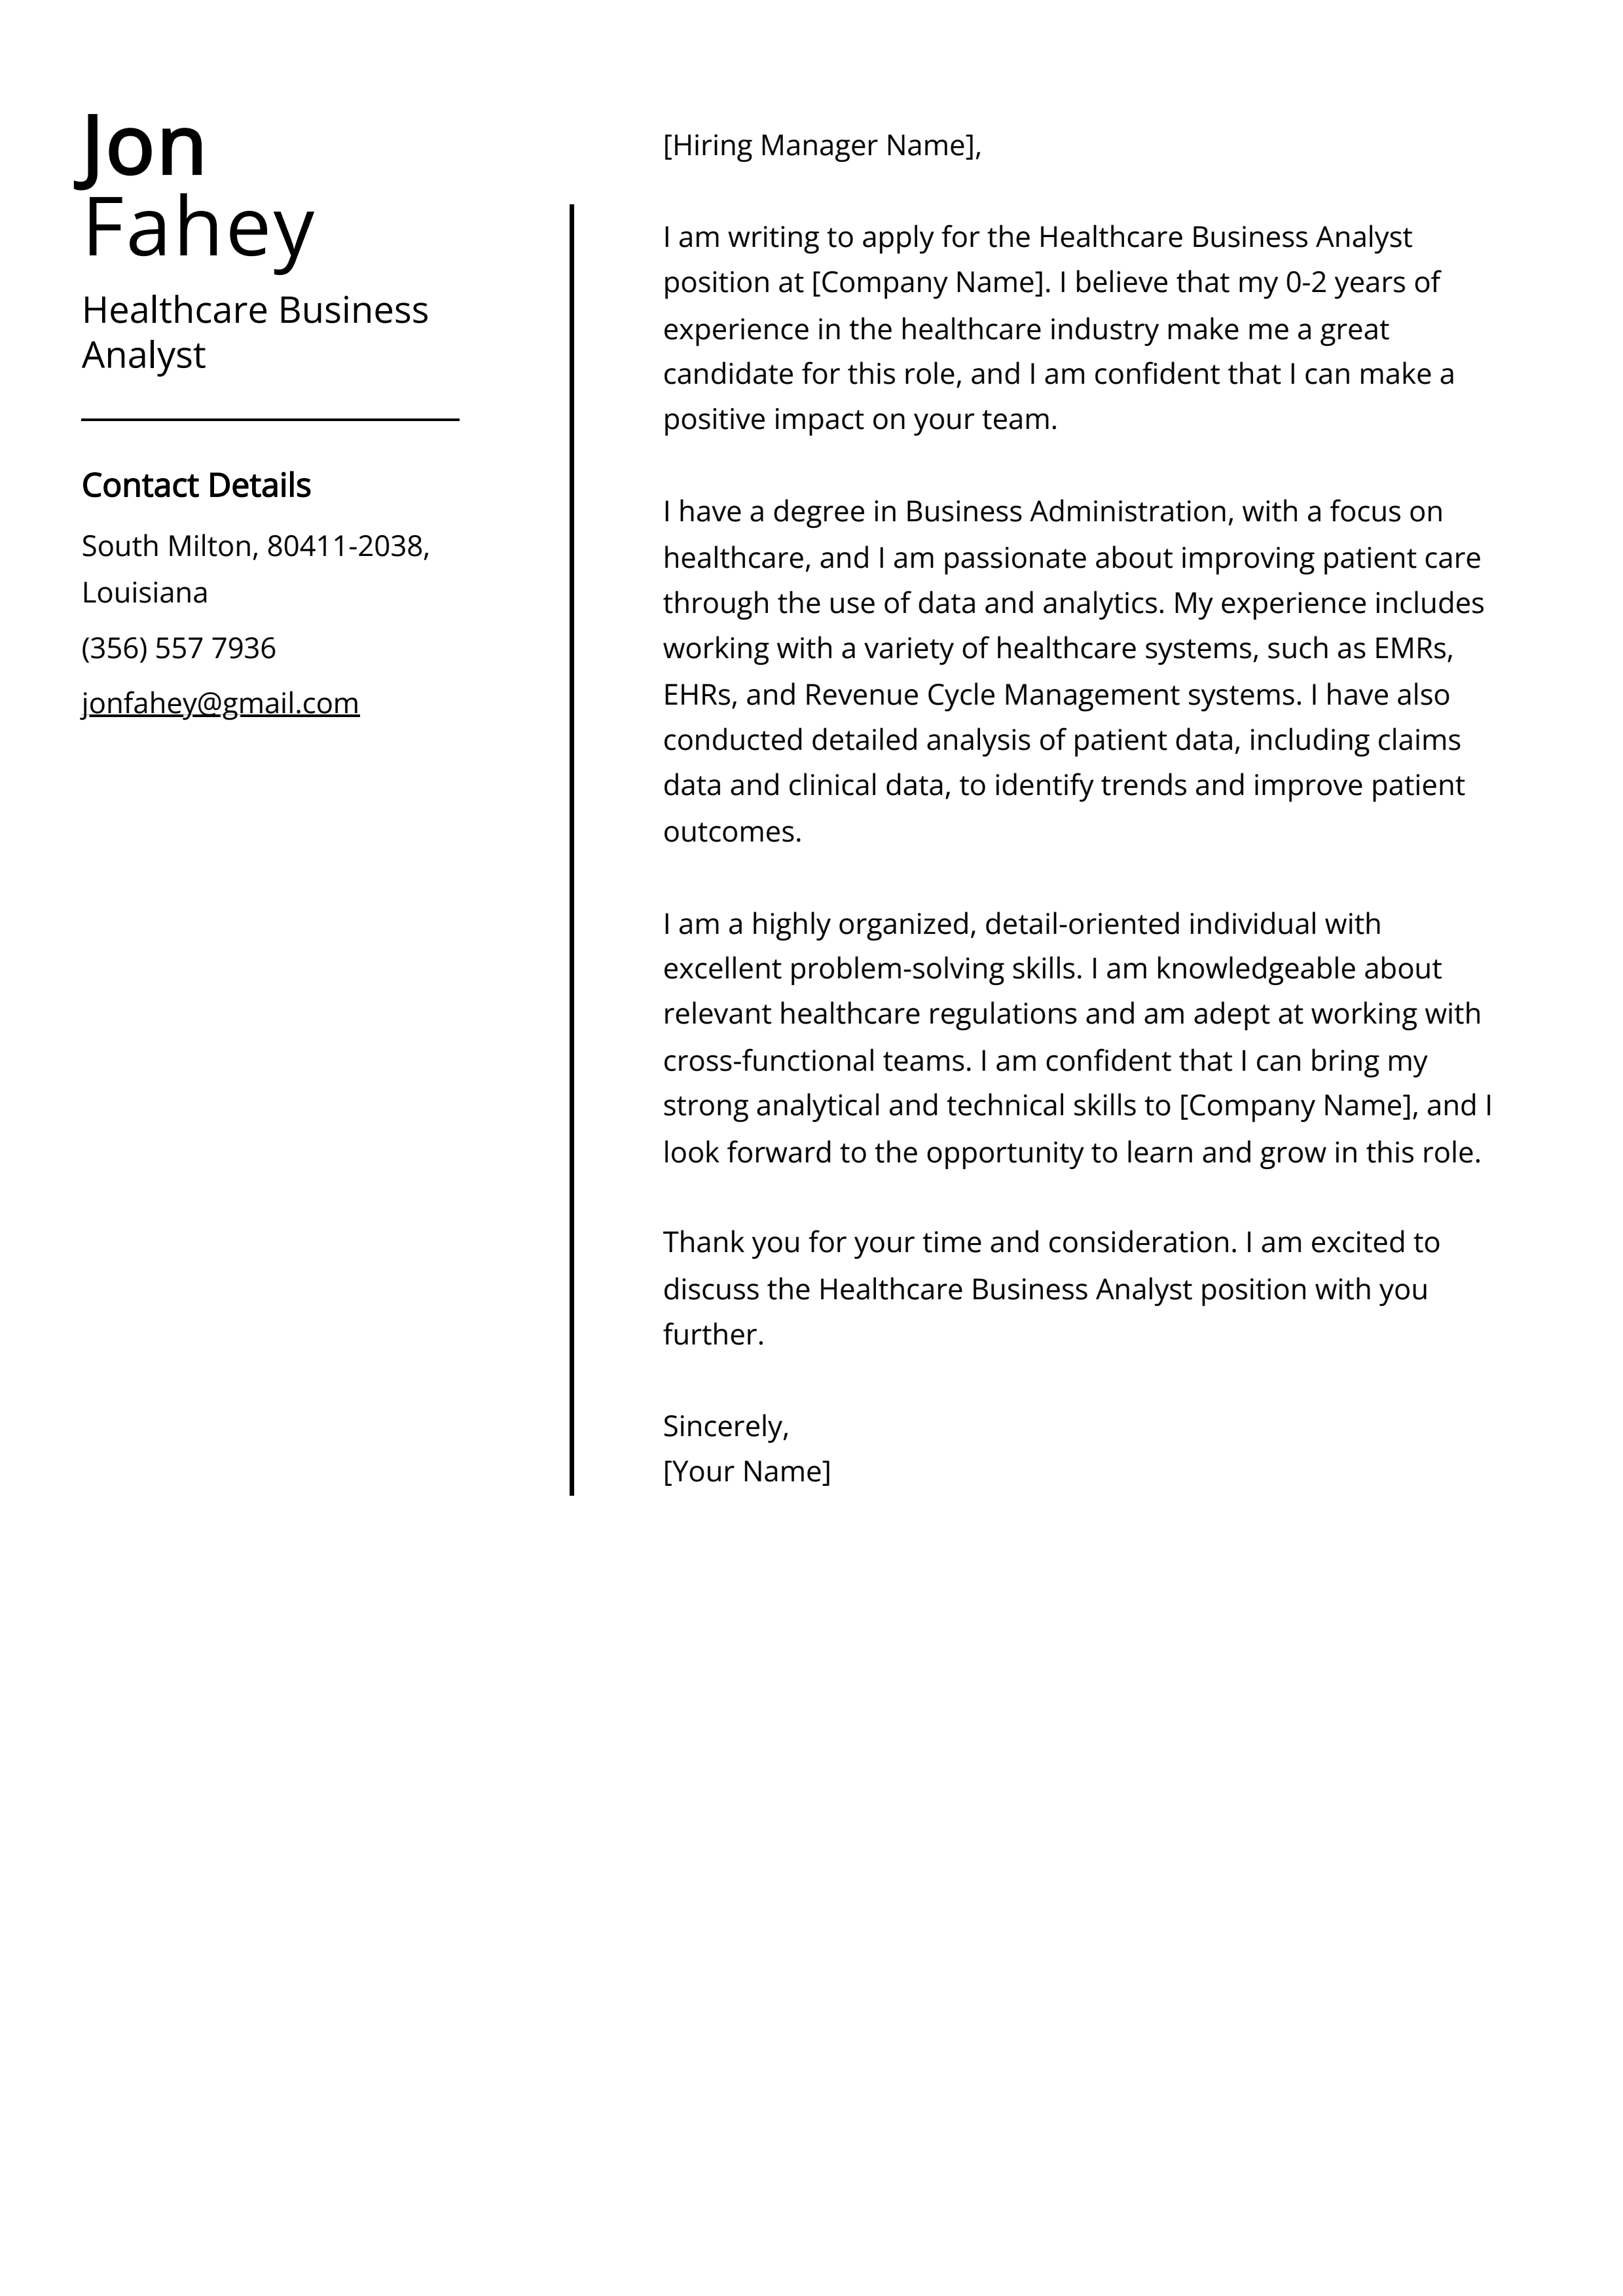 Healthcare Business Analyst Cover Letter Example